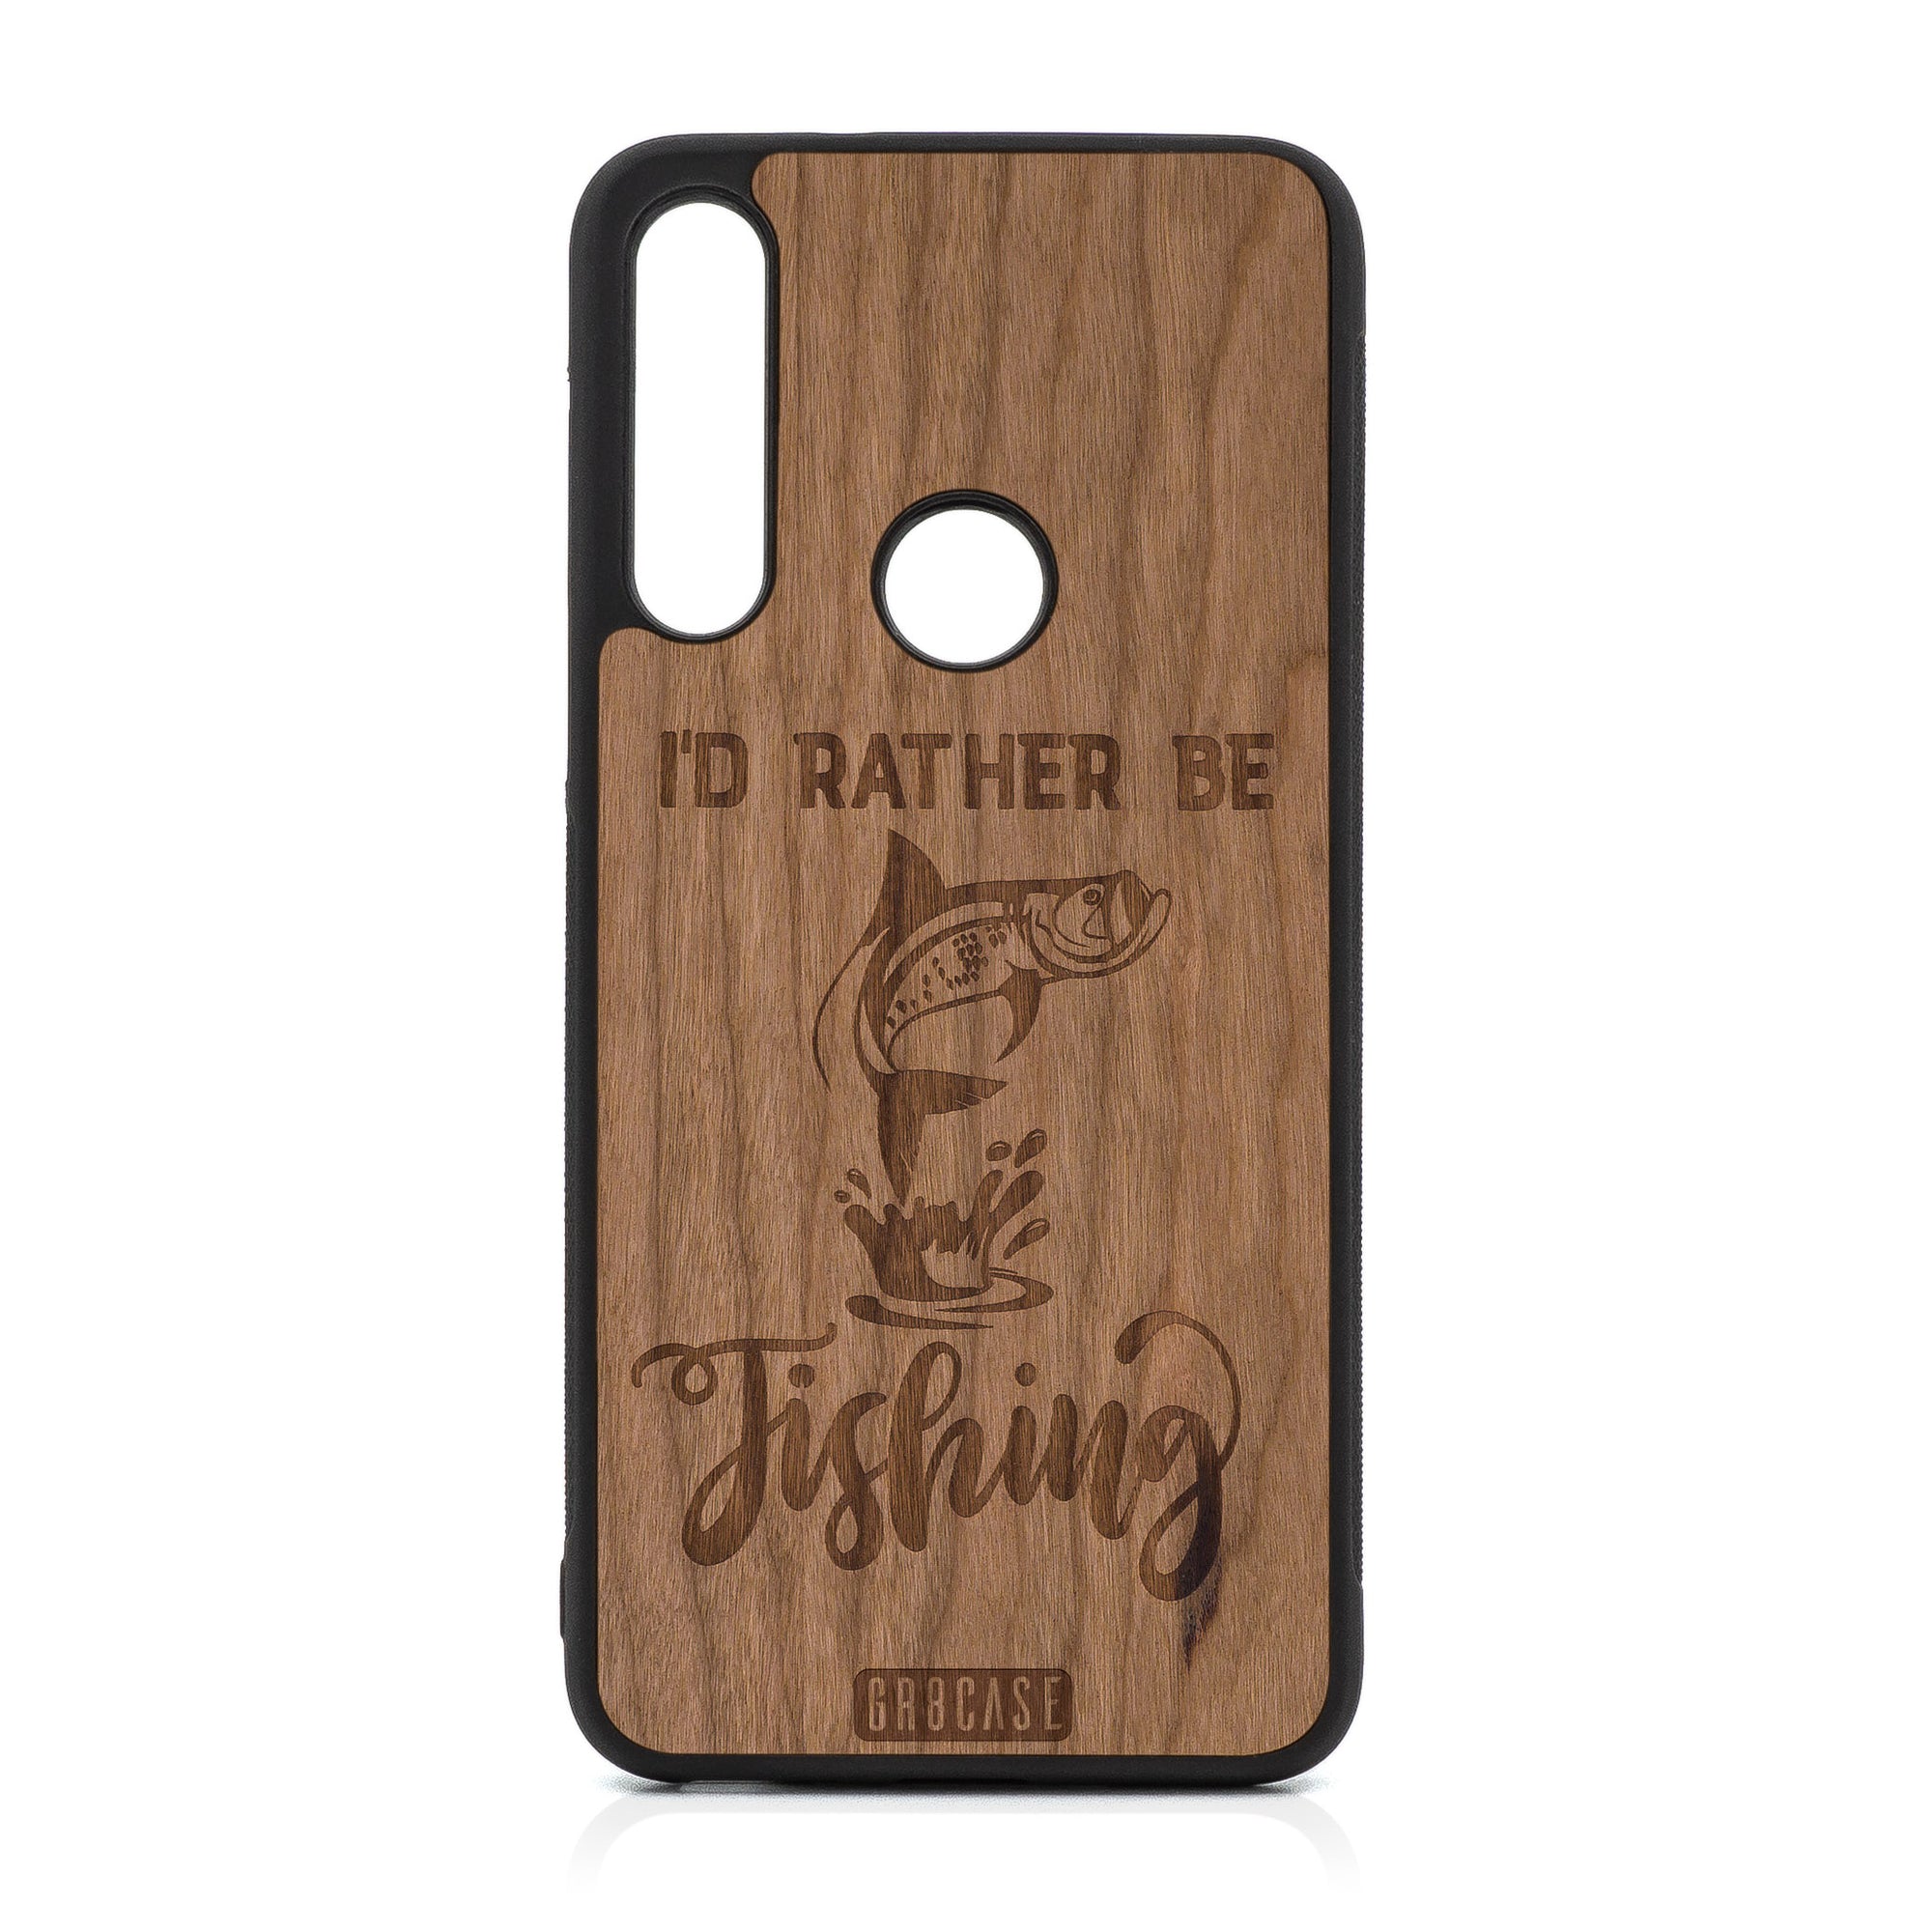 I'D Rather Be Fishing Design Wood Case For Moto G Fast